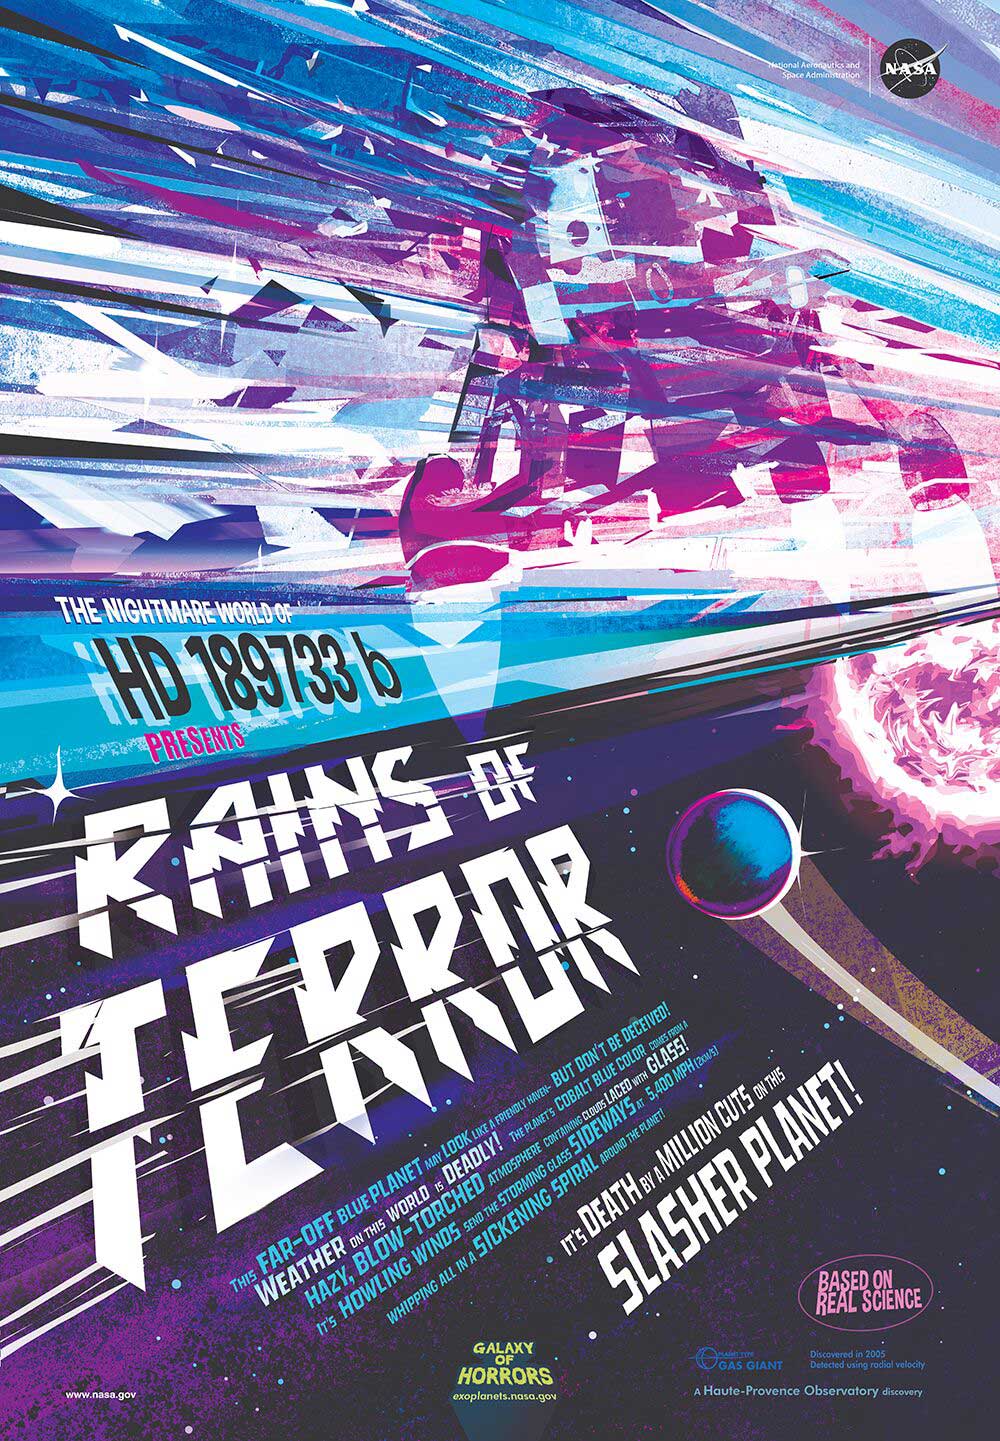 A poster done in the style of a vintage poster for a horror movie. Reading "Rains of Terror," it's death by a million cuts on this slasher planet. Jagged edges of glass can be seen battering a spacecraft on this alien world.